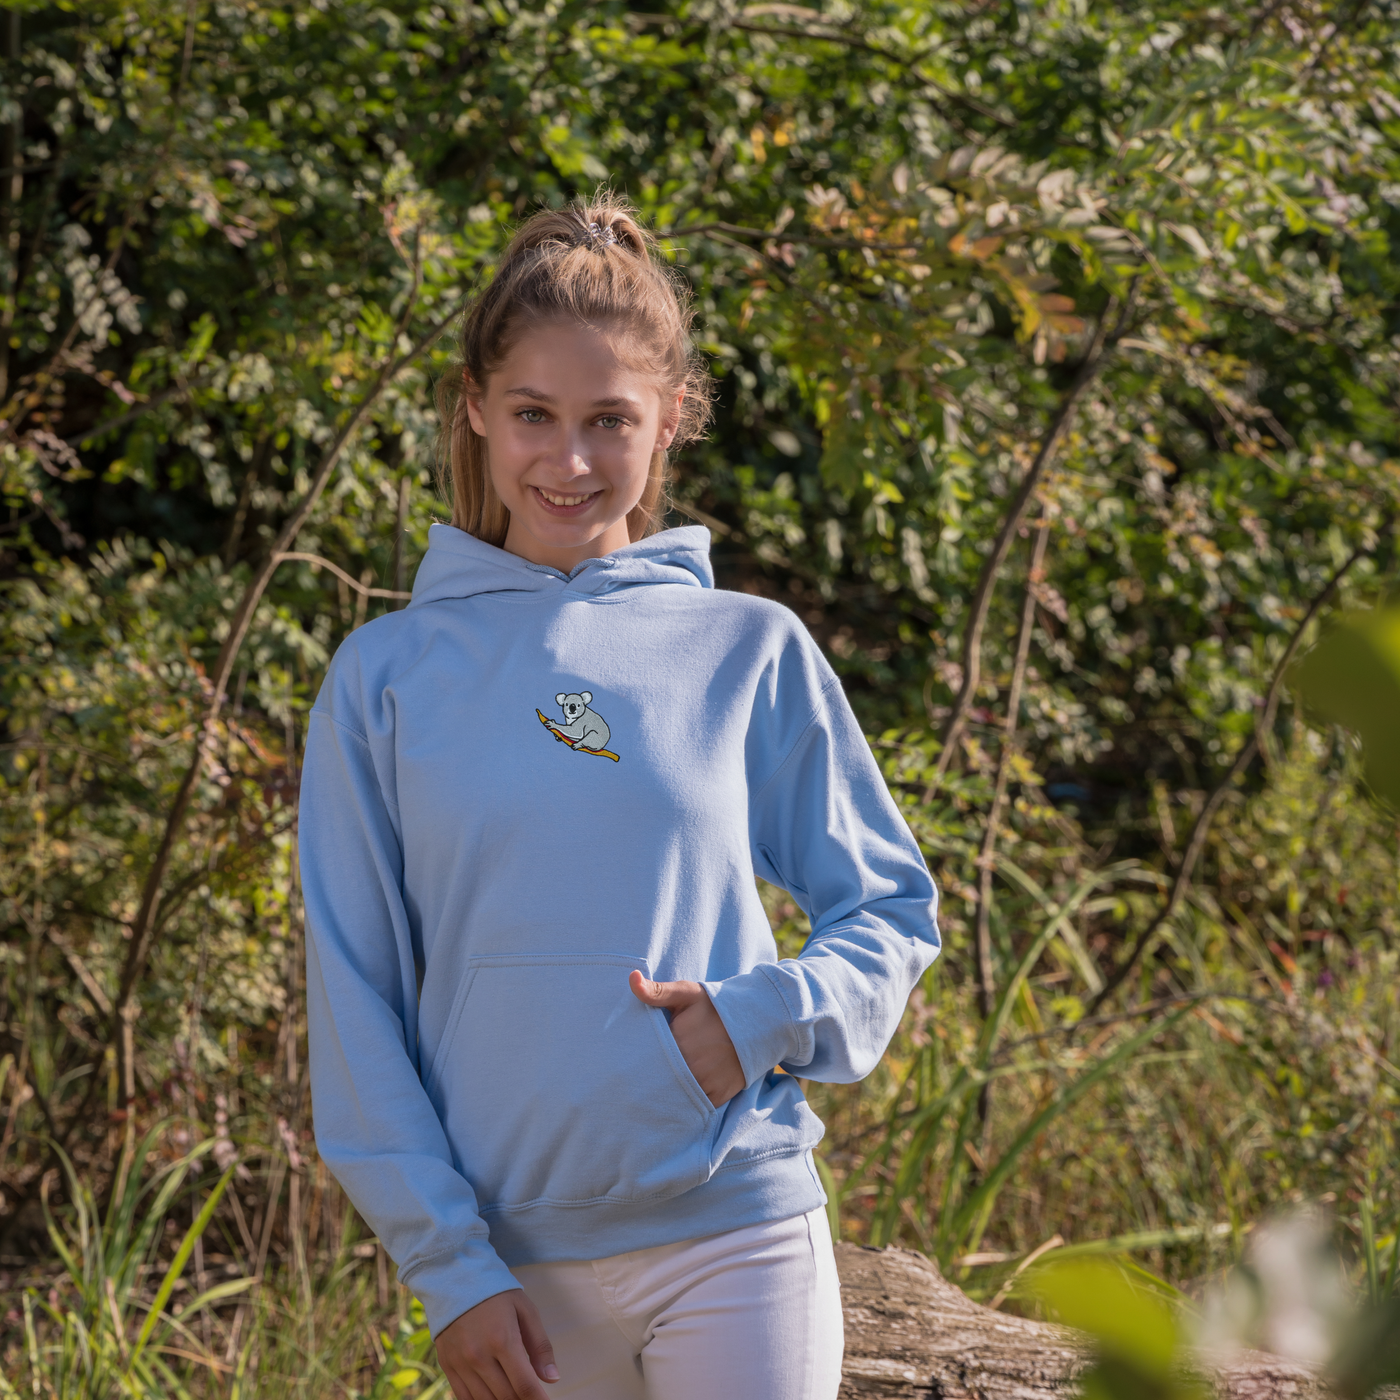 Bobby's Planet Women's Embroidered Koala Hoodie from Australia Down Under Animals Collection in Light Blue Color#color_light-blue